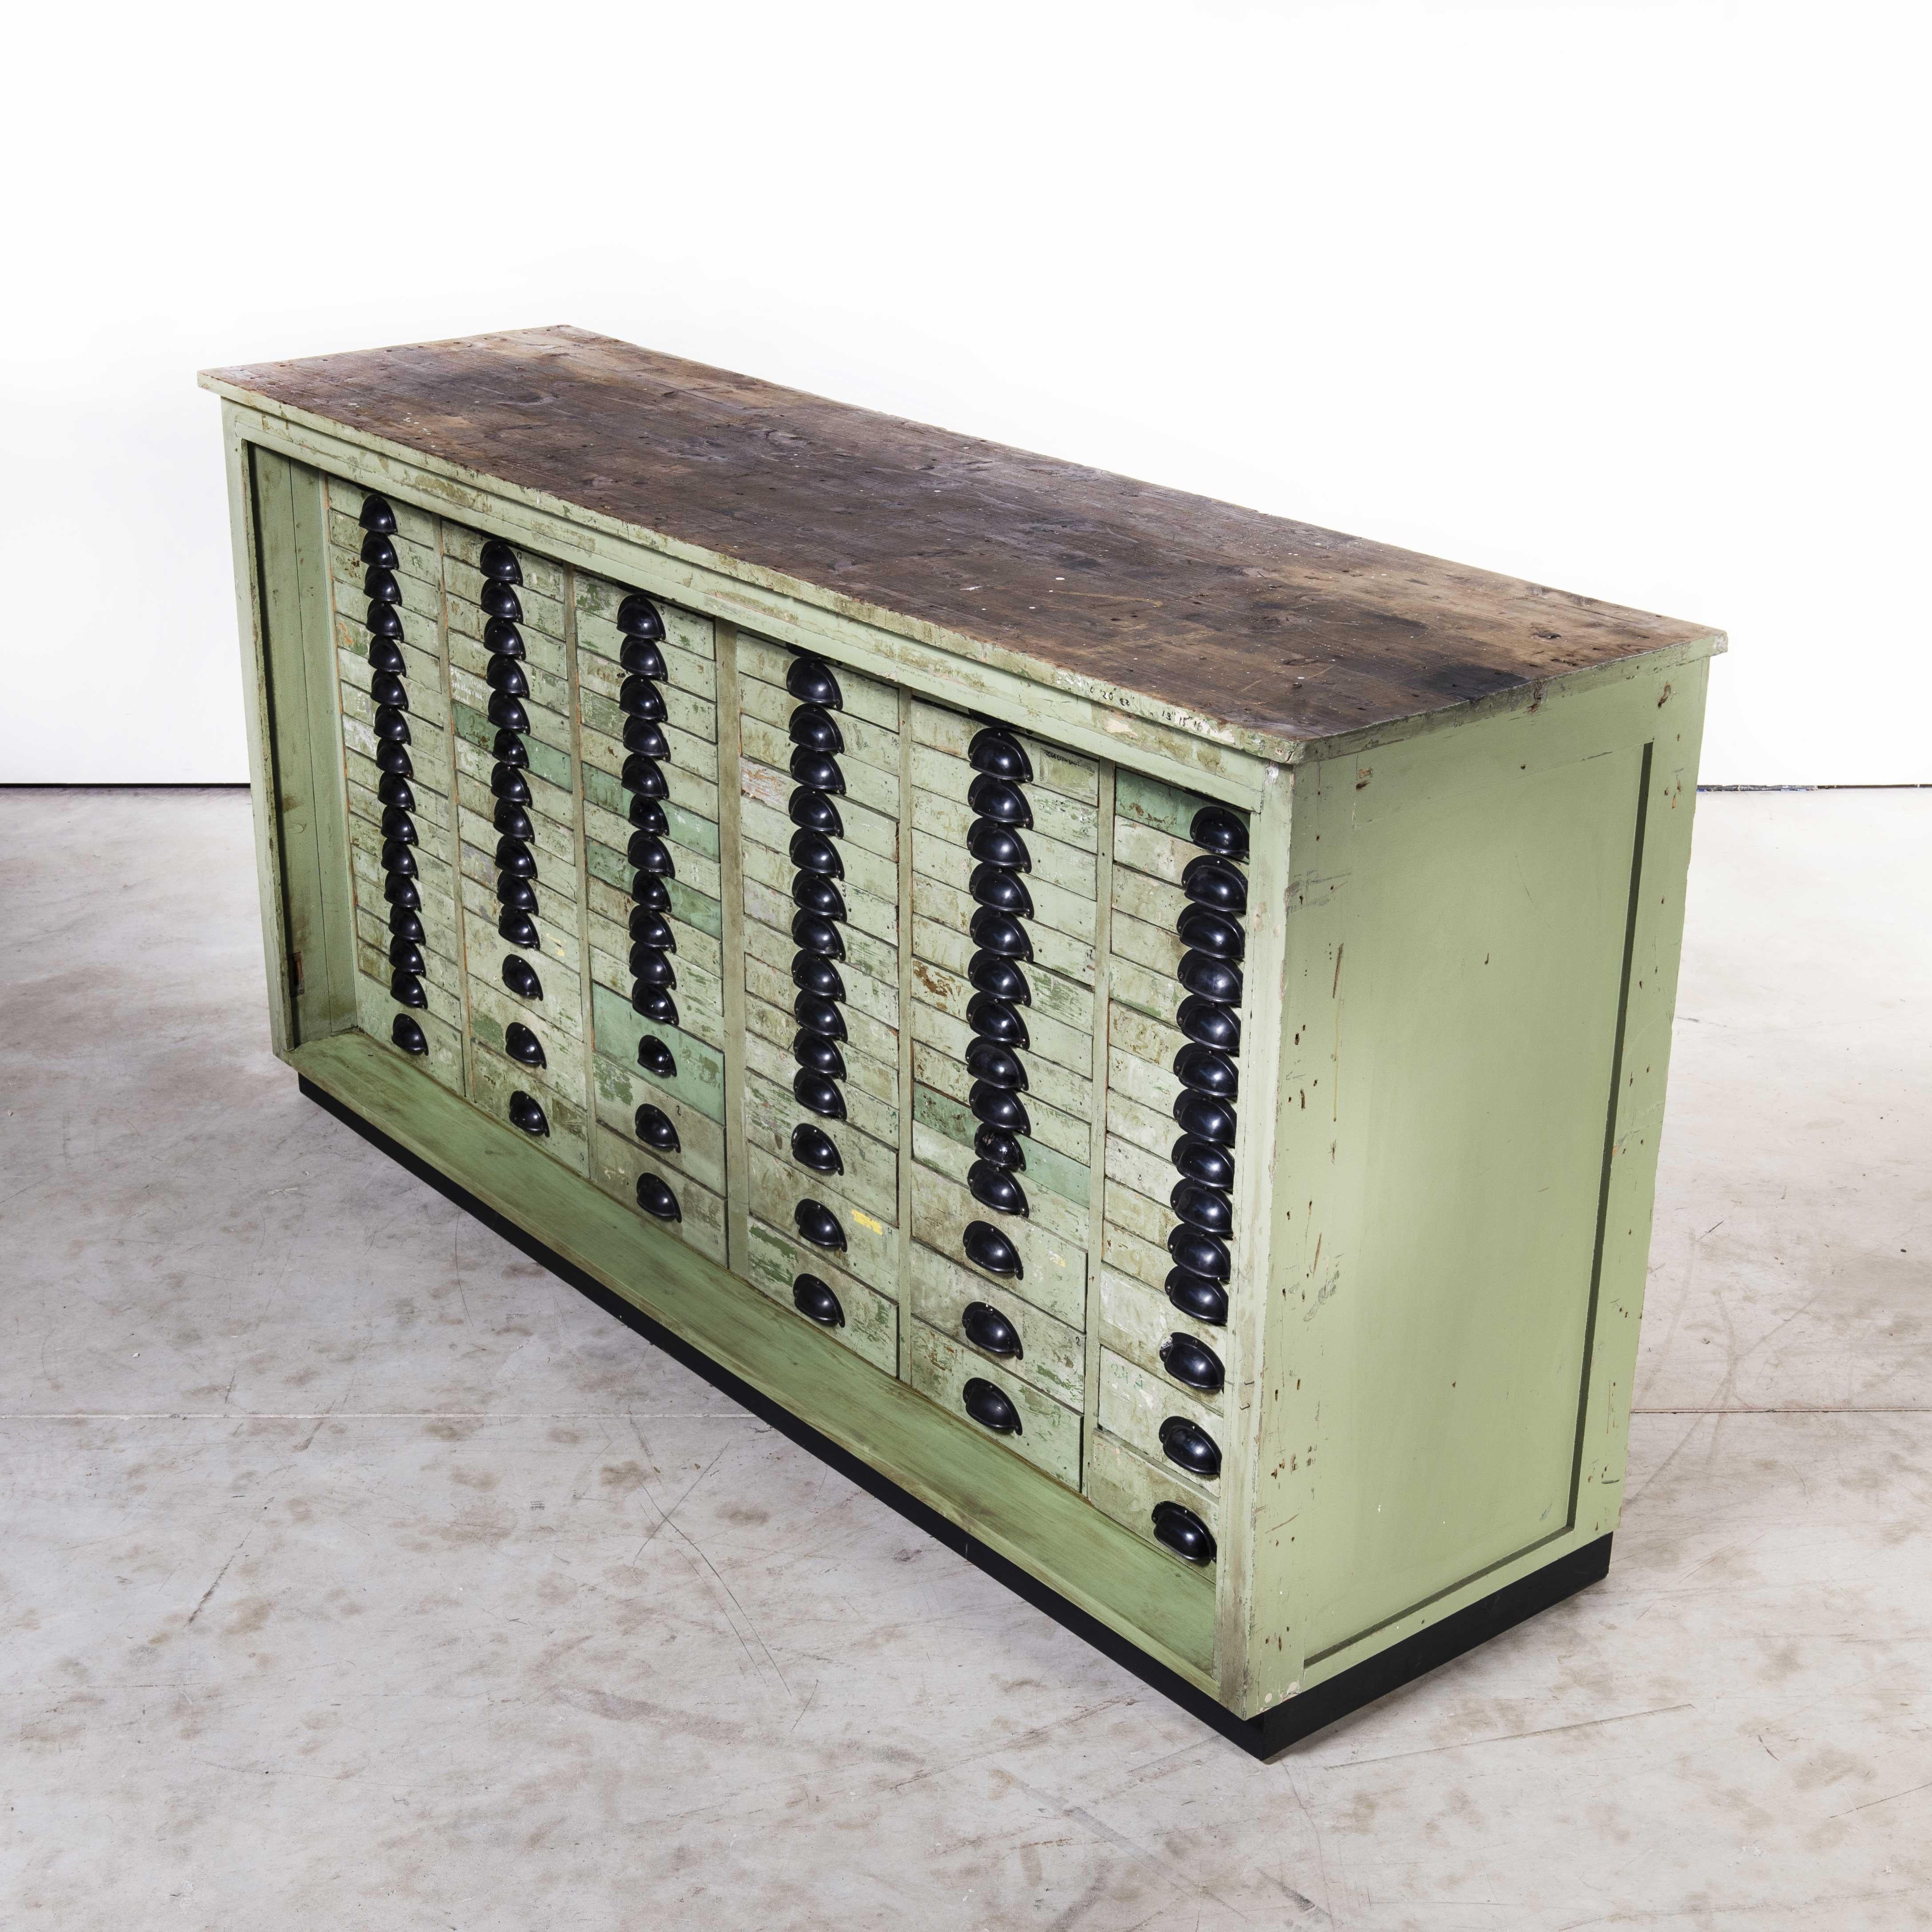 1950’s French original workshop multidrawer cabinet – Industrial green (Model 1094.1)

1950’s French original workshop multidrawer cabinet – Industrial green. One of our favourite finds, we sourced this cabinet in Lille where it was hiding in the